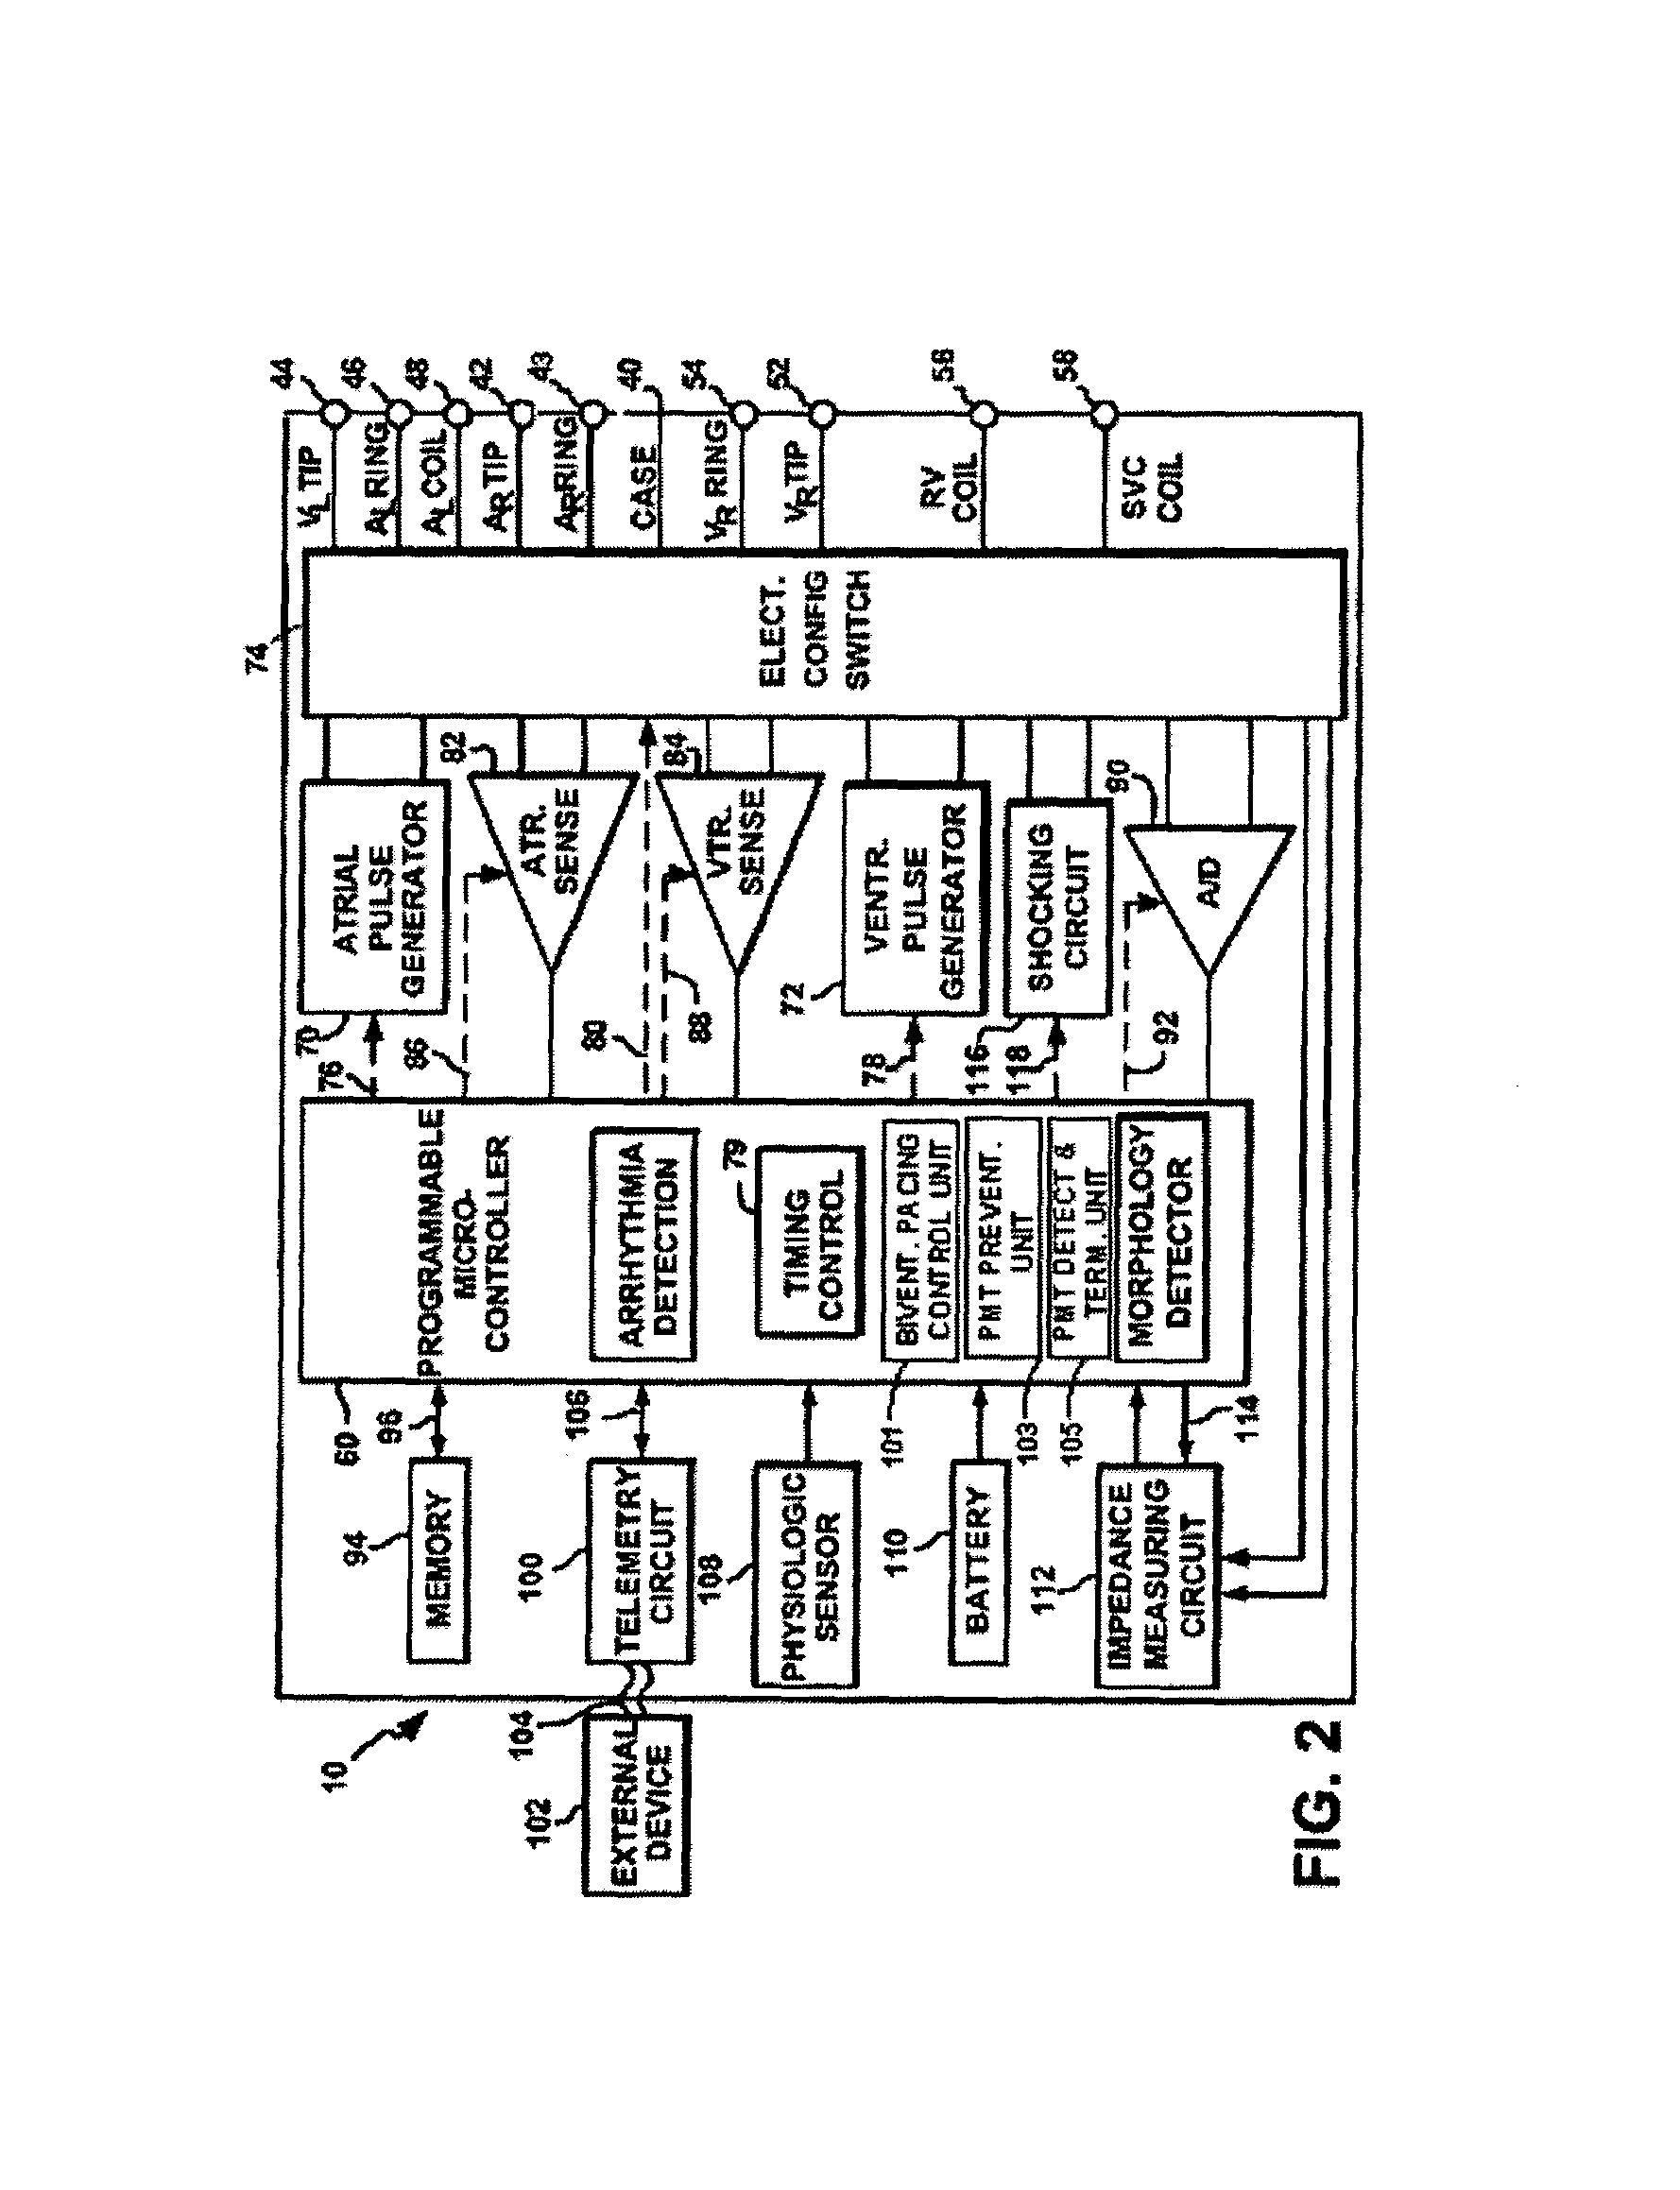 System and methods for preventing, detecting, and terminating pacemaker mediated tachycardia in biventricular implantable cardiac stimulation device